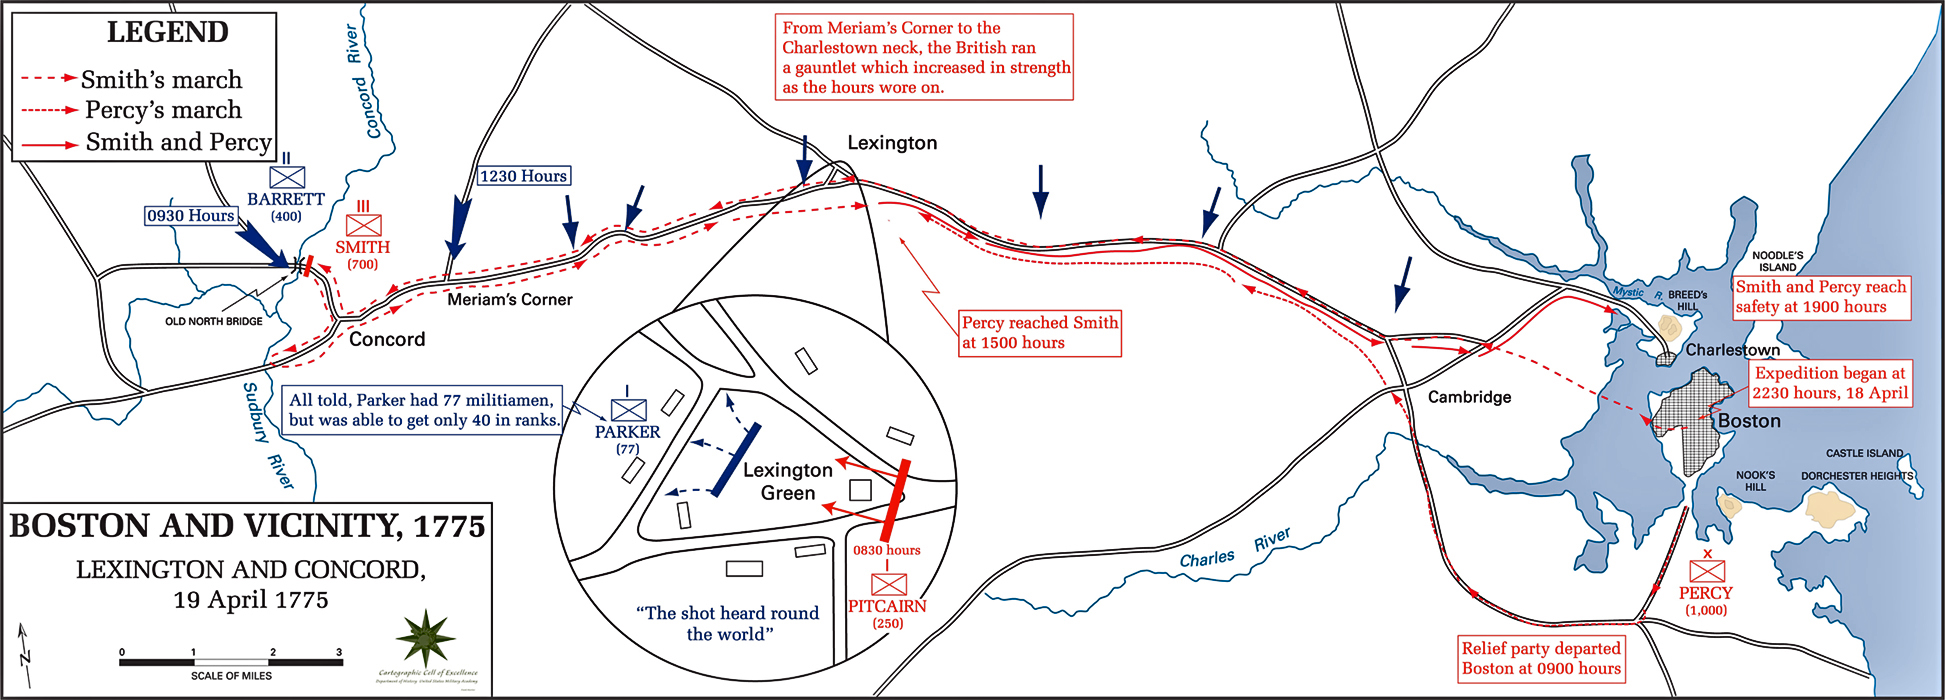 Map of the Battle of Lexington and Concord - April 19, 1775